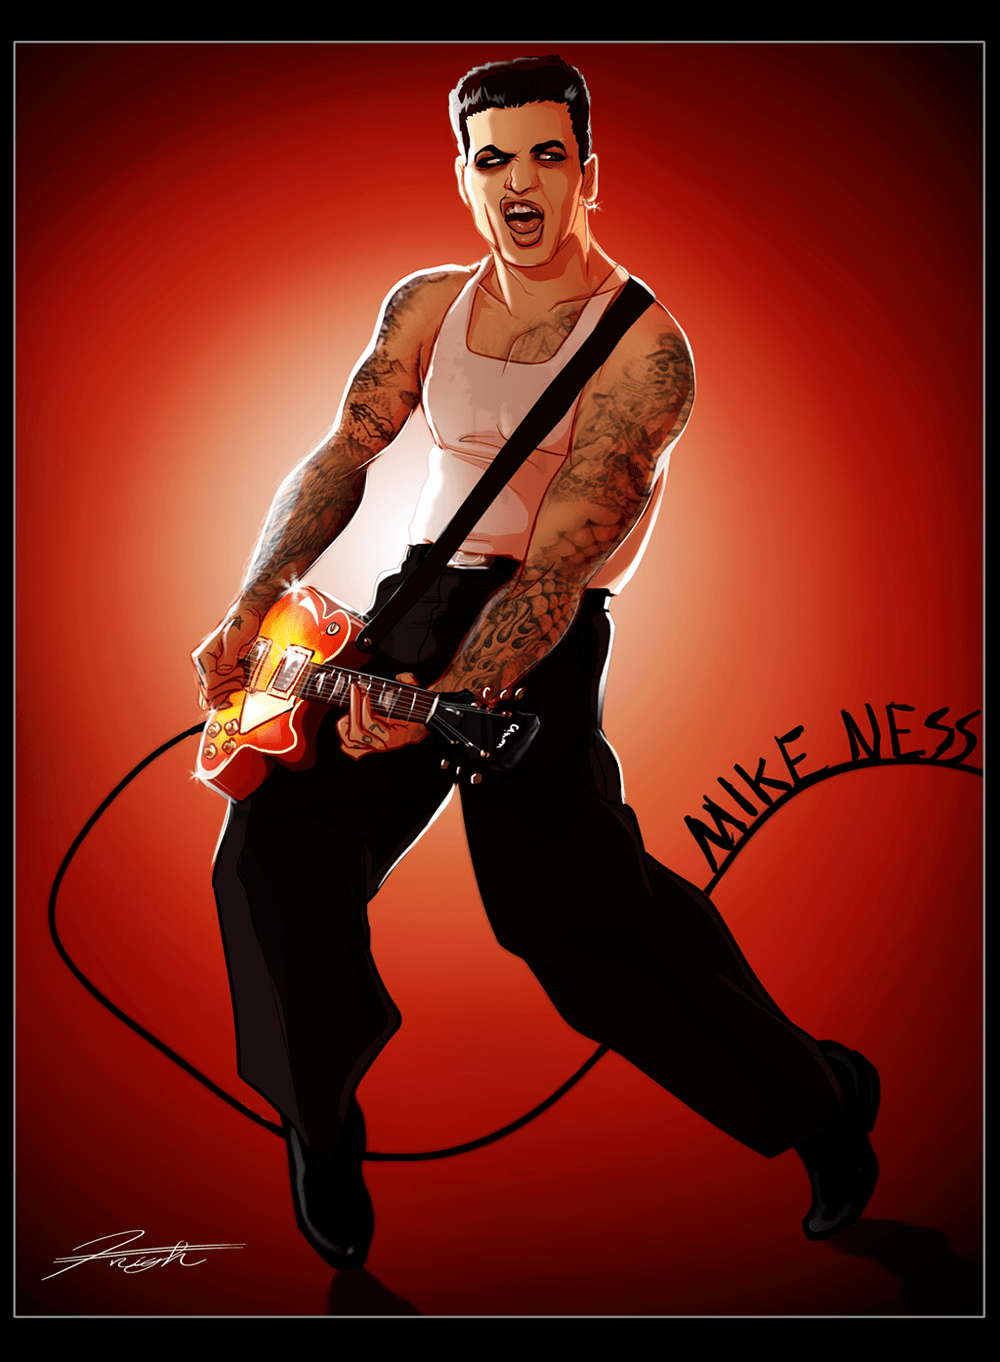 Mike Ness of Social Distortion by djcoulz. People